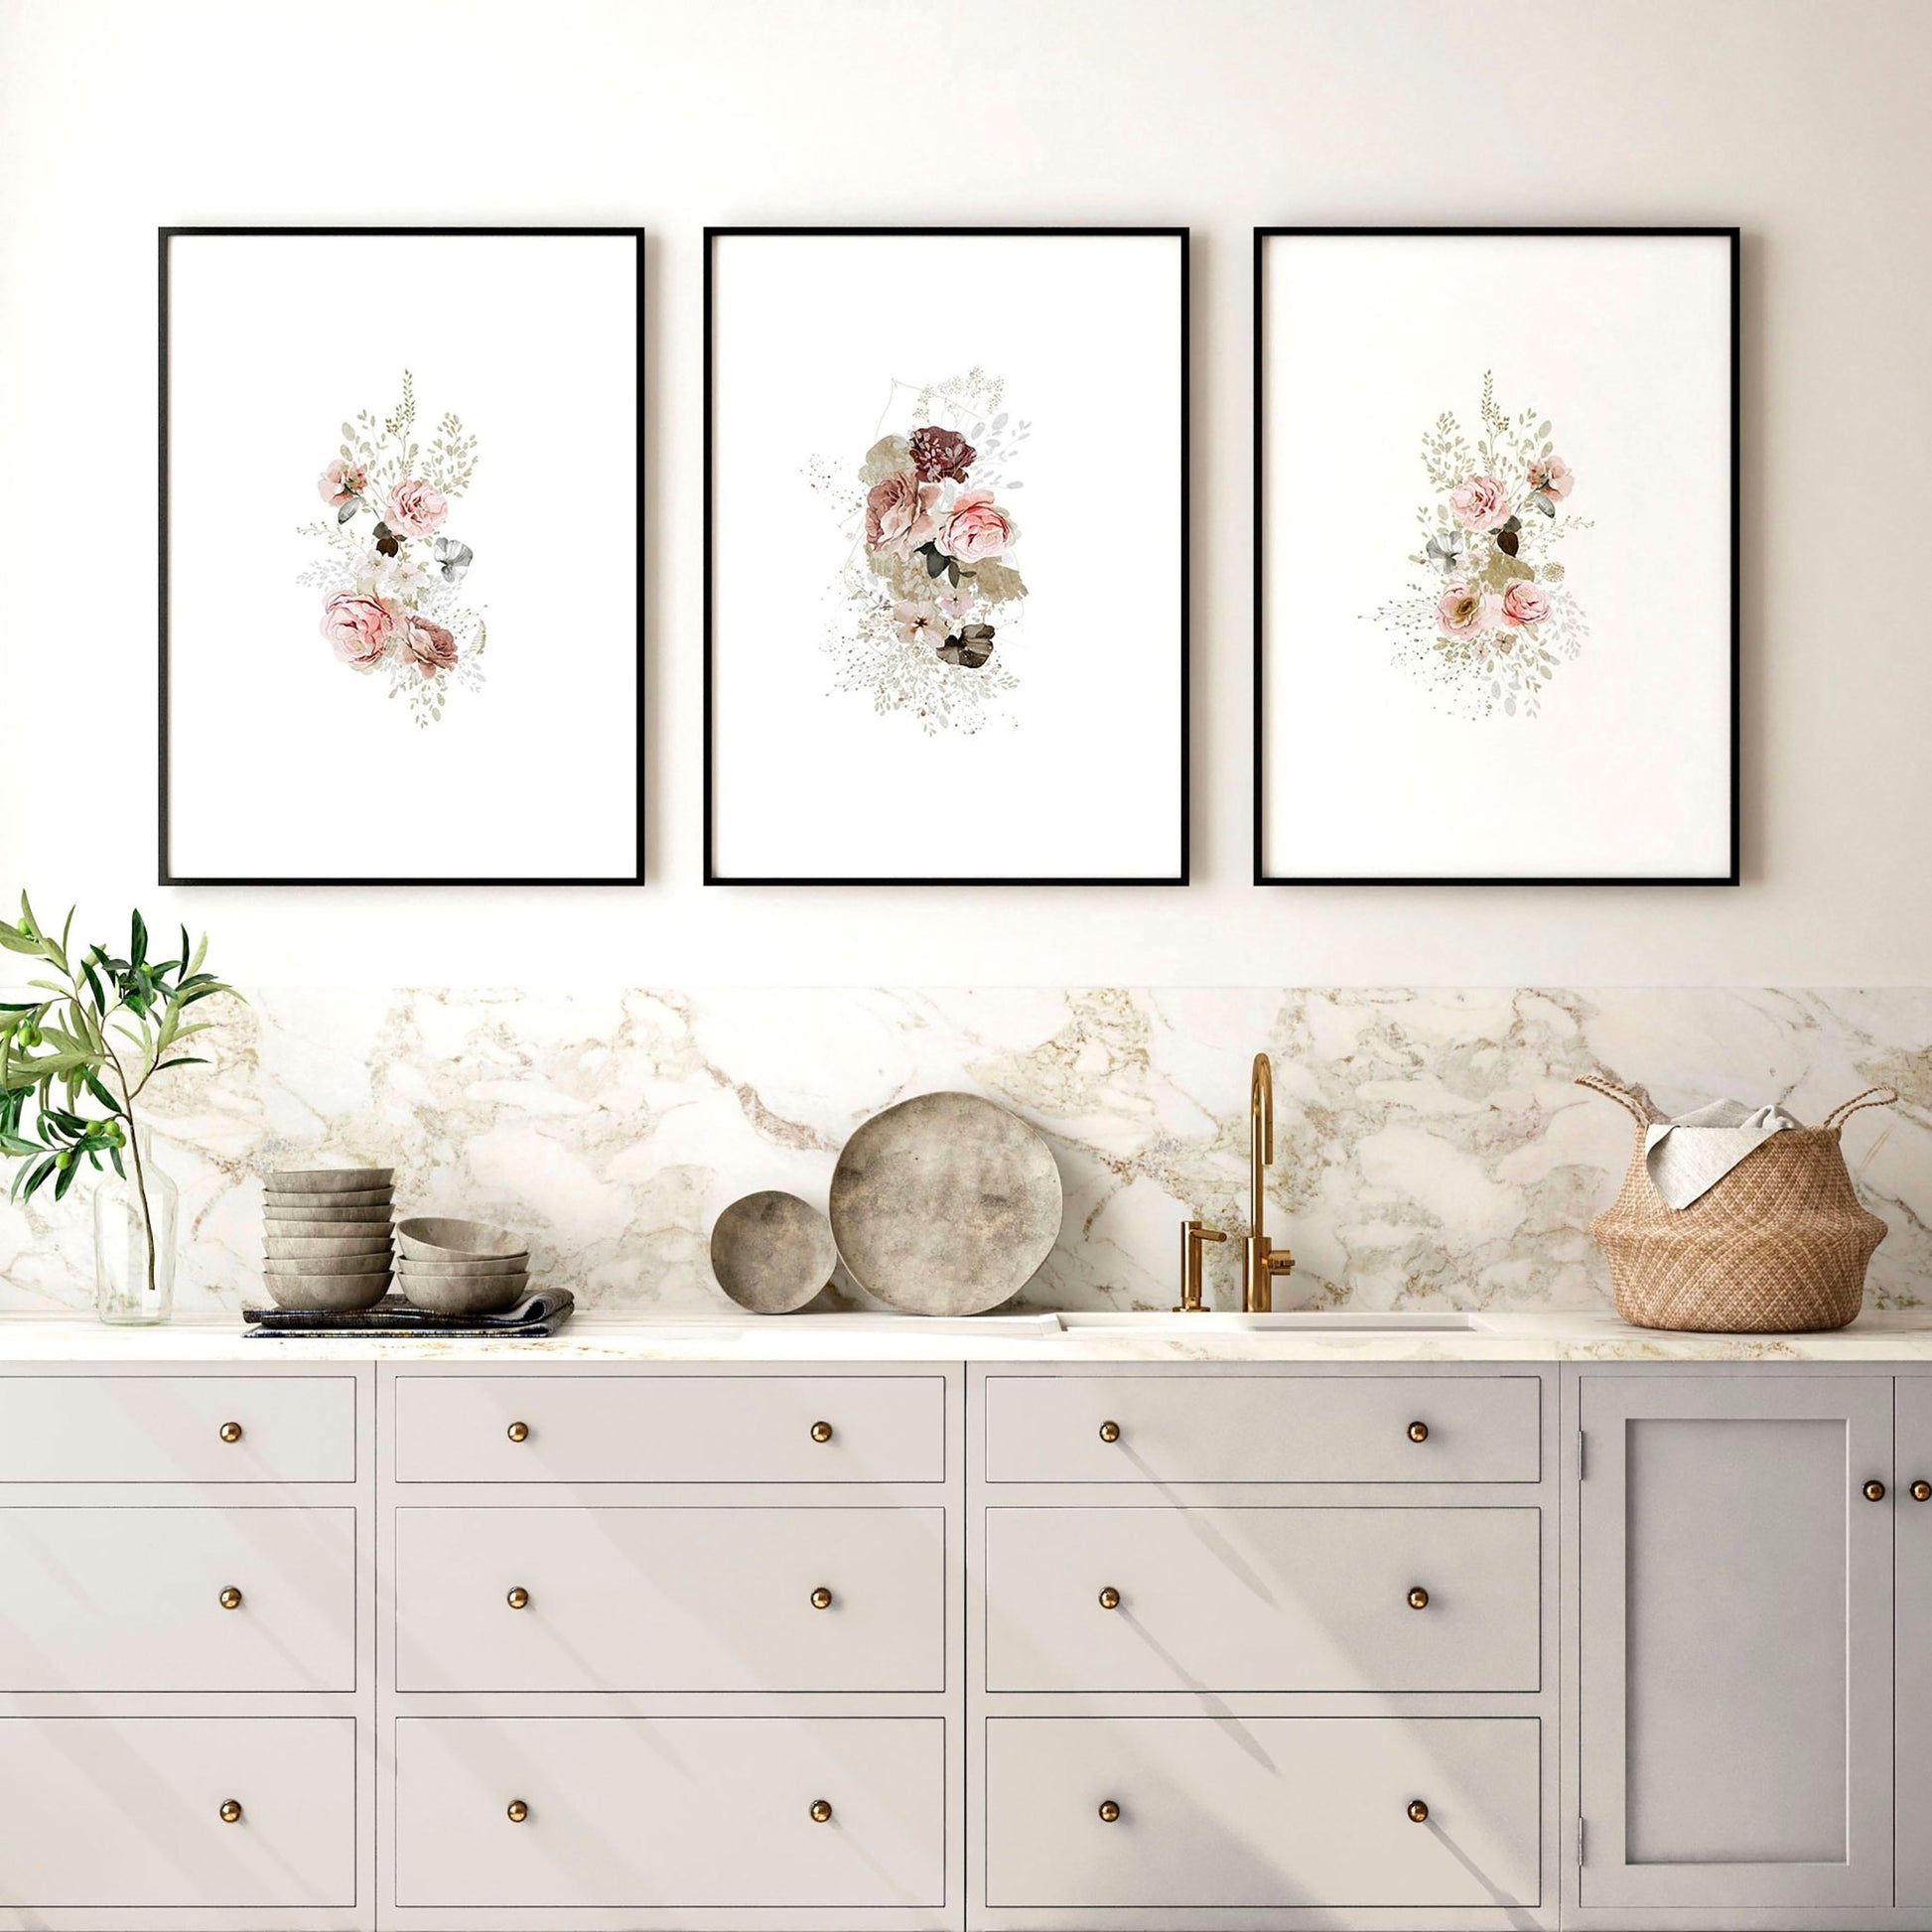 Art for the kitchen | set of 3 Shabby Chic wall art prints